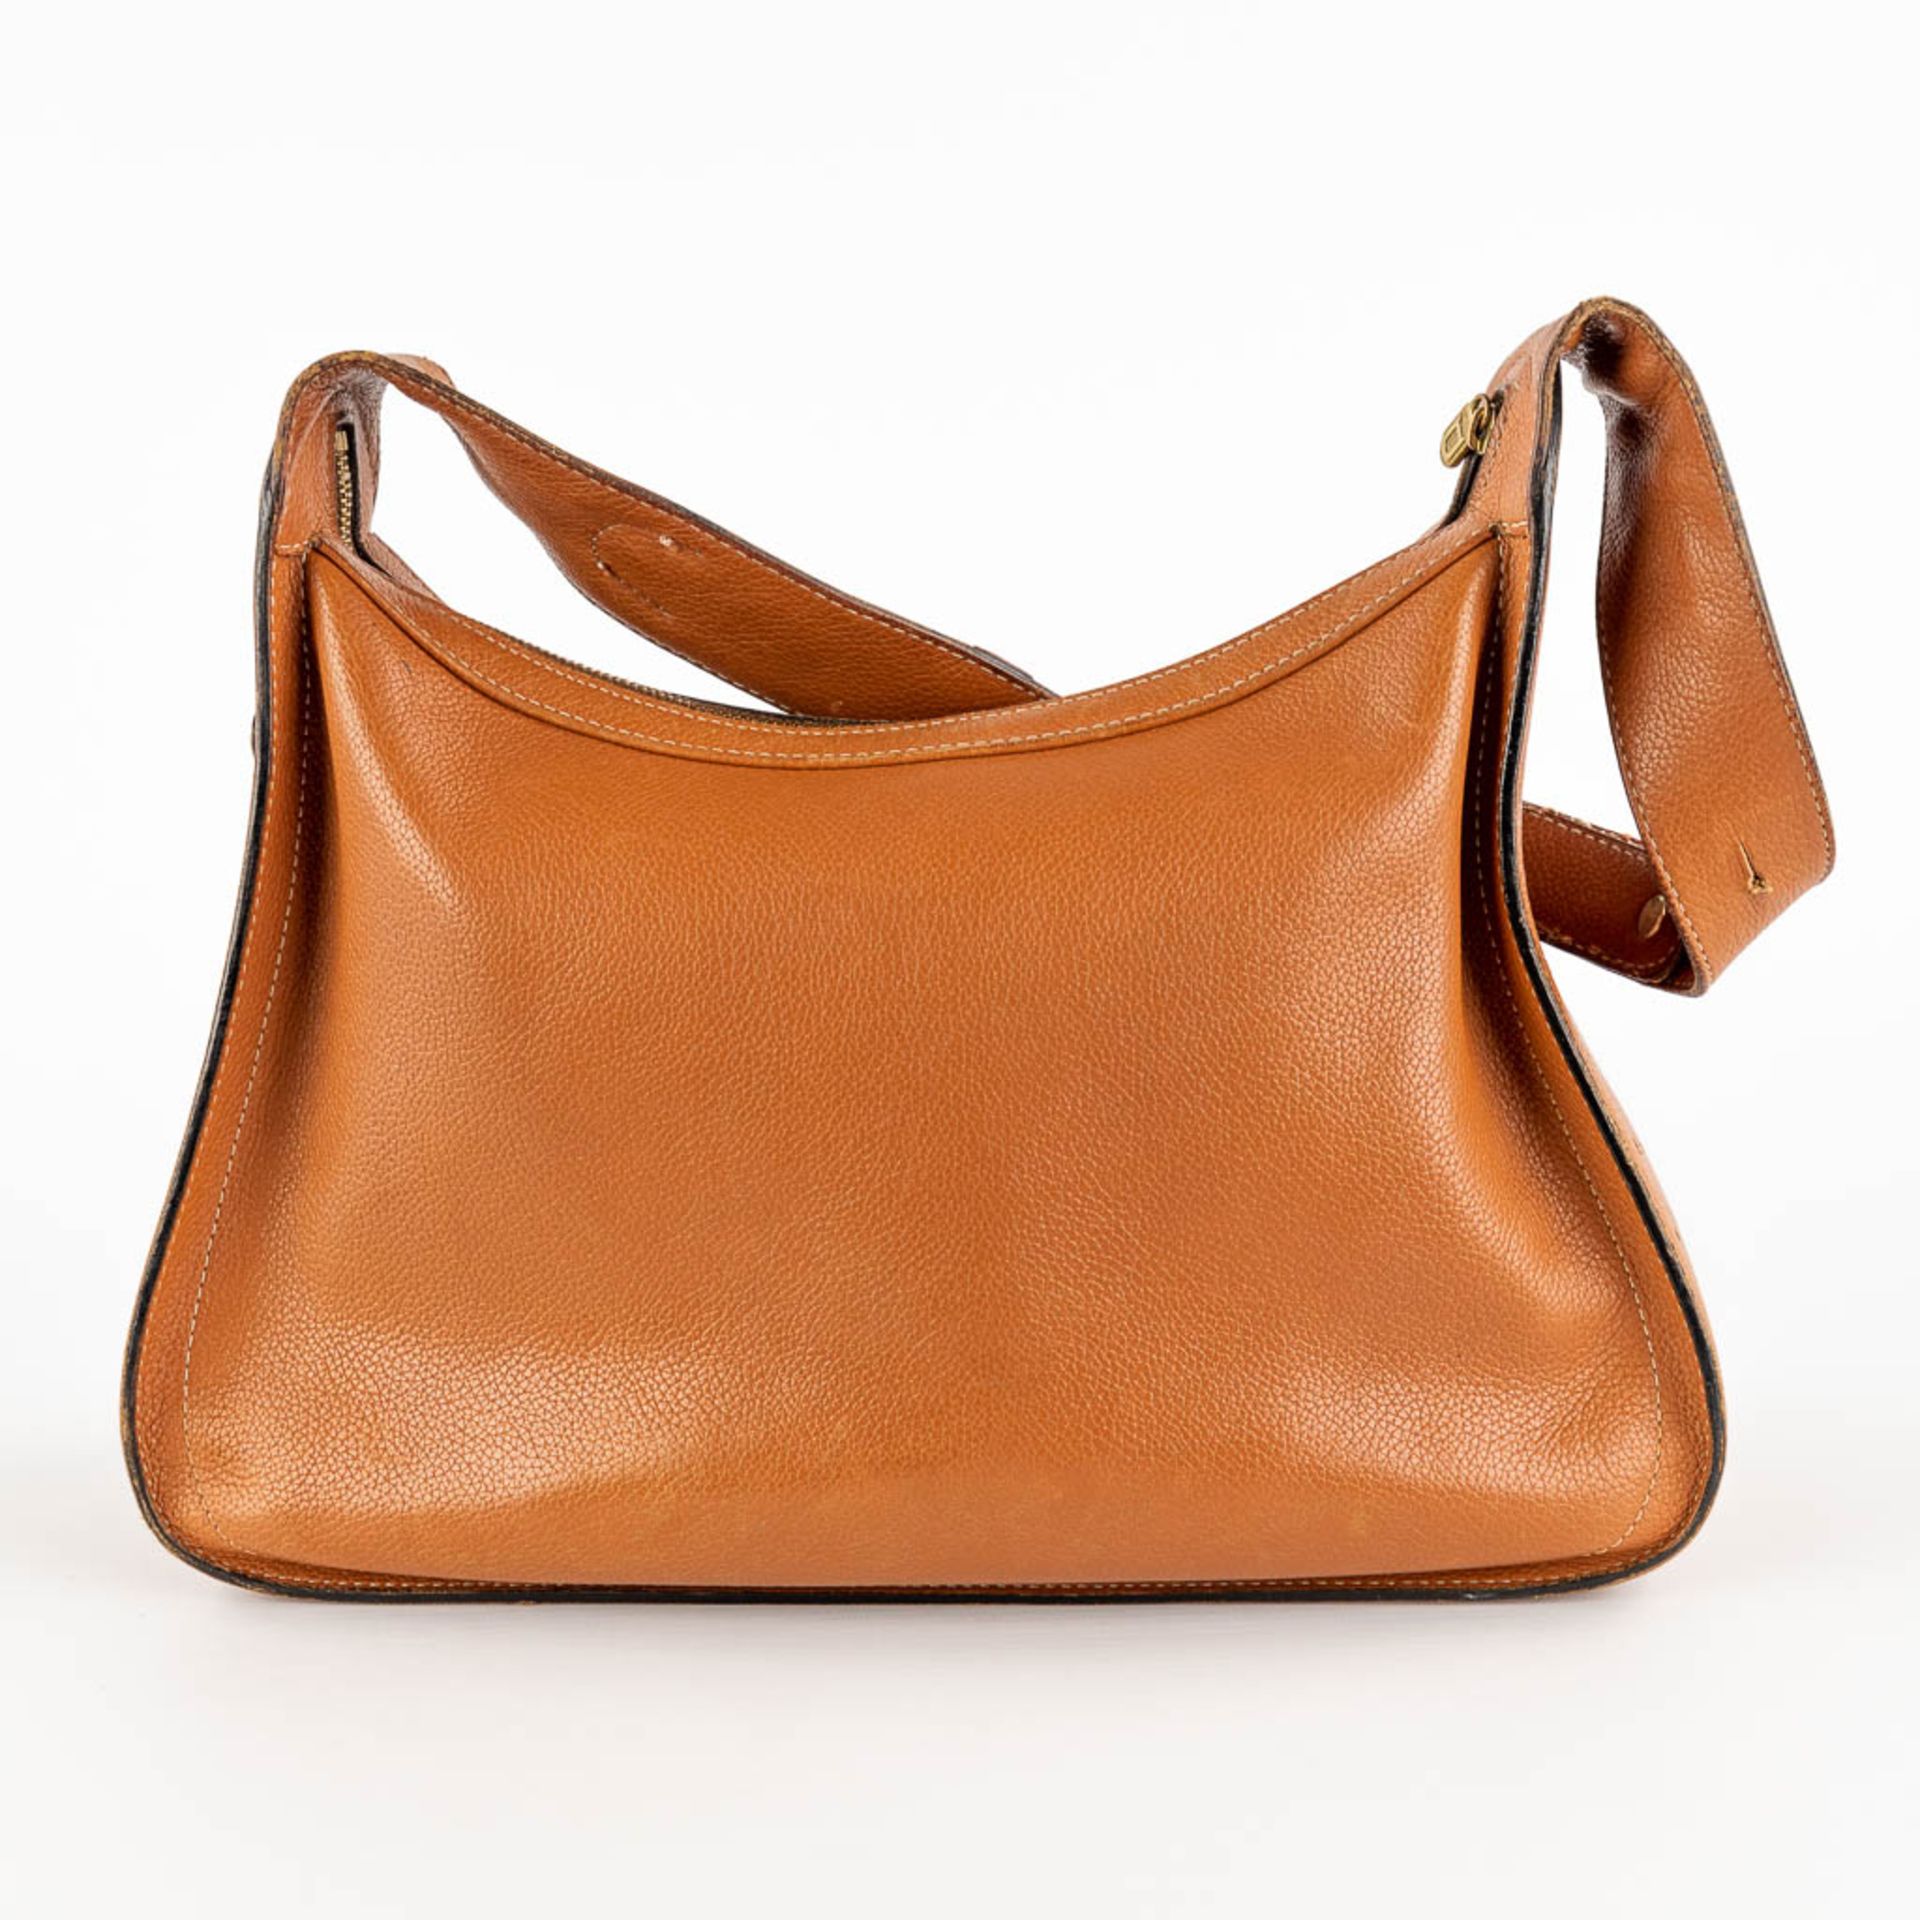 Delvaux, Pensée, a handbag made of brown leather. (W:24 x H:32 cm) - Image 4 of 18